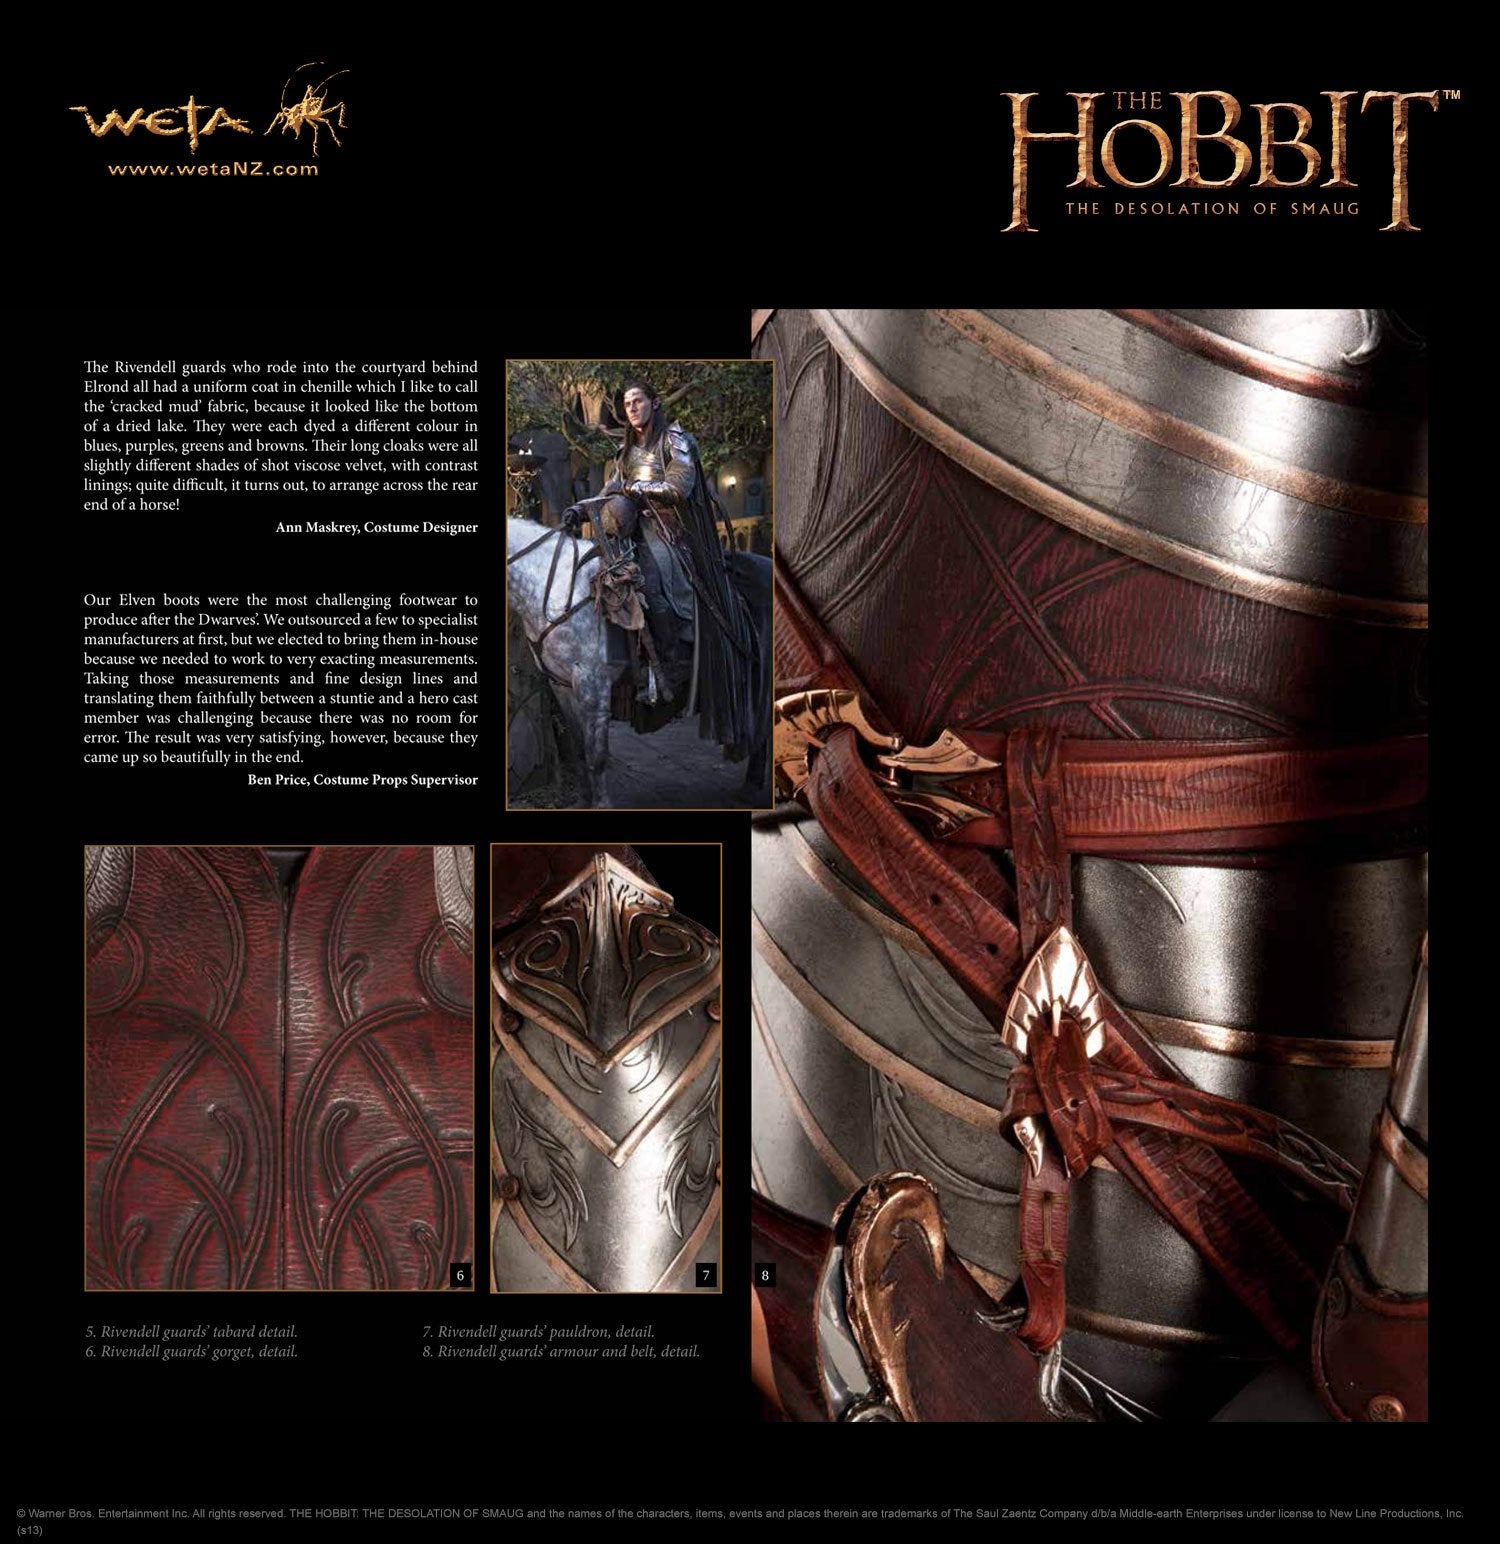 The Hobbit: The Desolation of Smaug Chronicles: Cloaks & Daggers - D'Autores